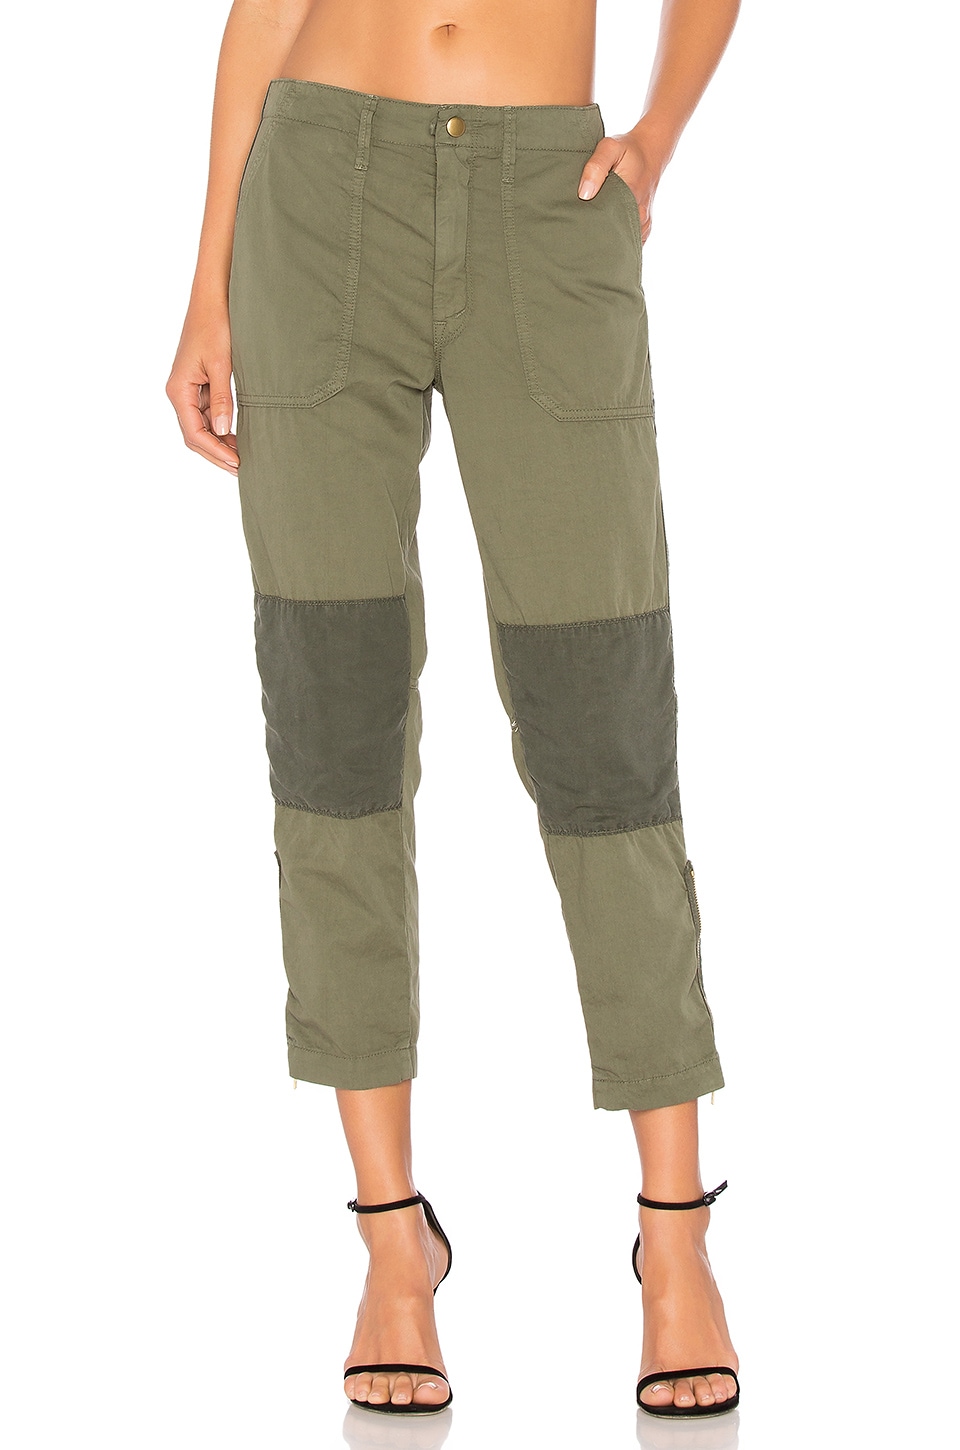 MOTHER The Army Racketeer Pant in The Eagle Has Landed | REVOLVE